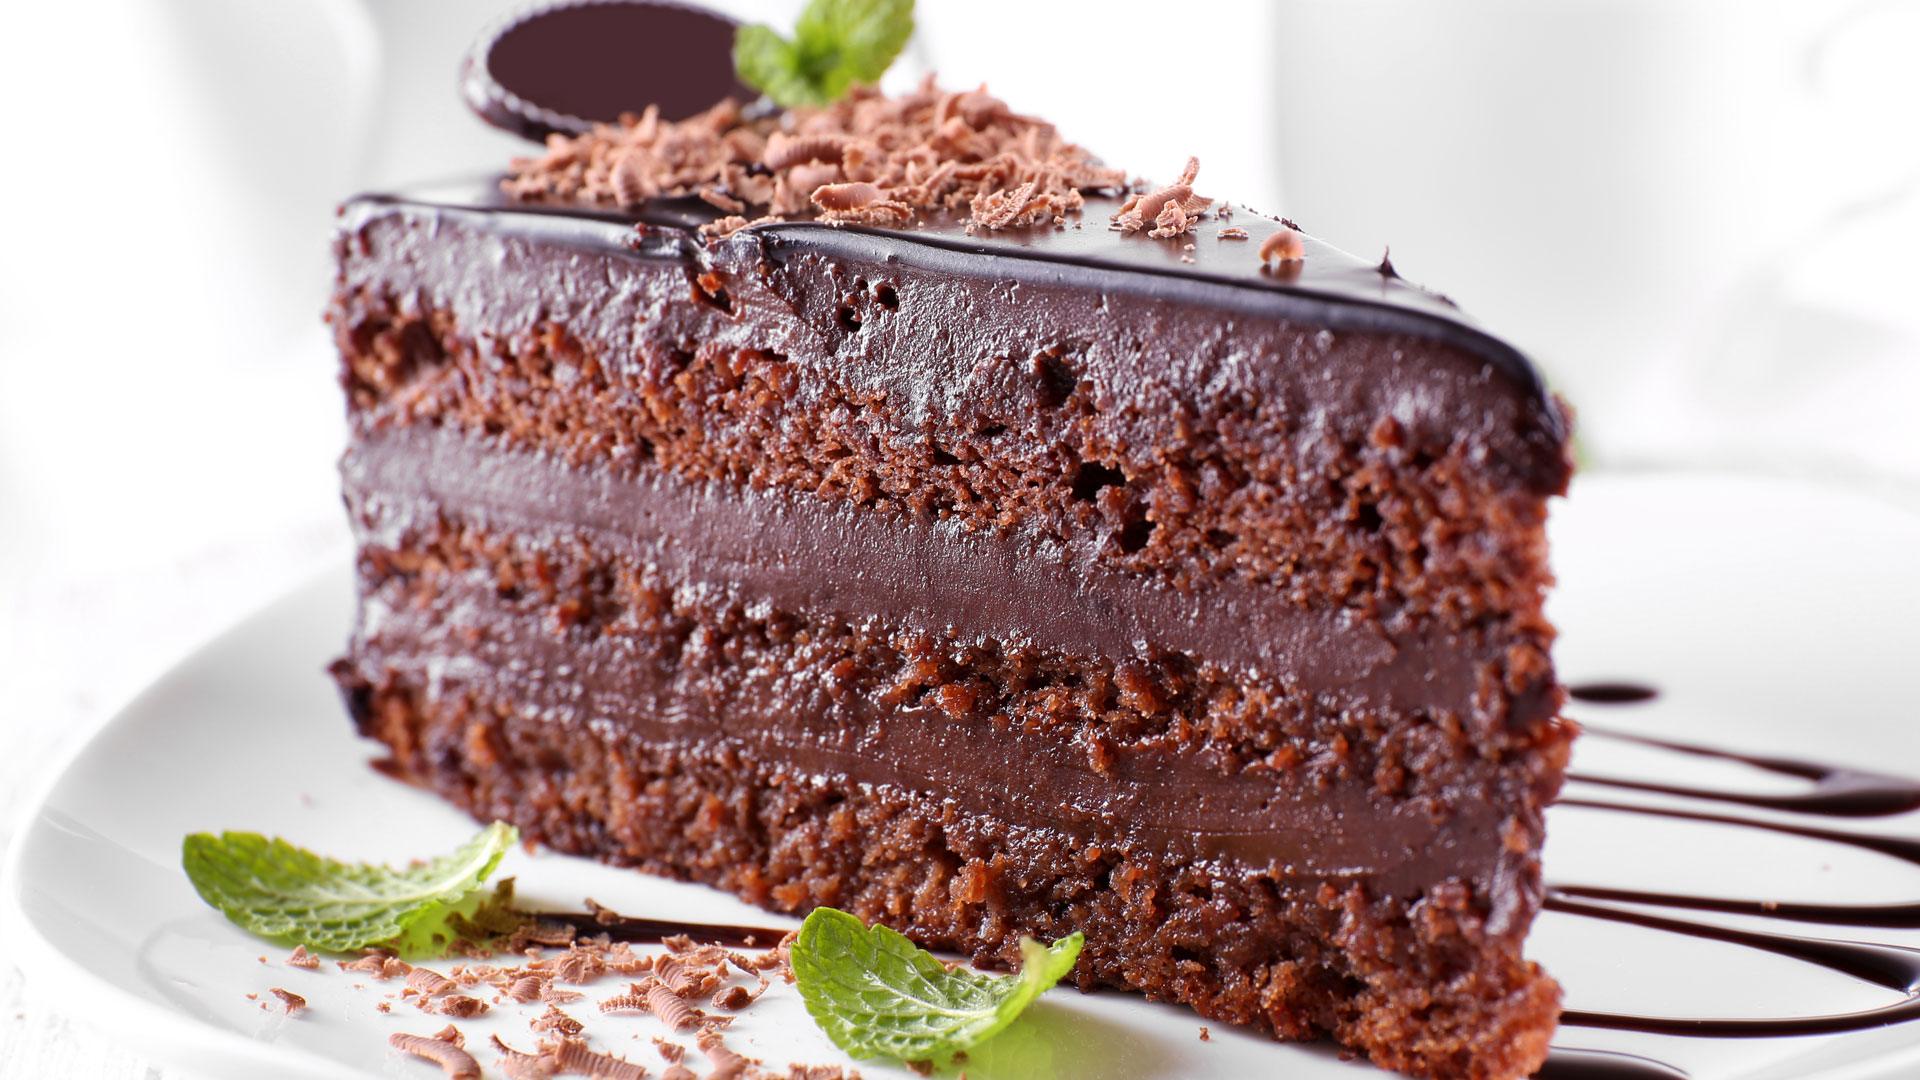 A rich piece of chocolate cake.